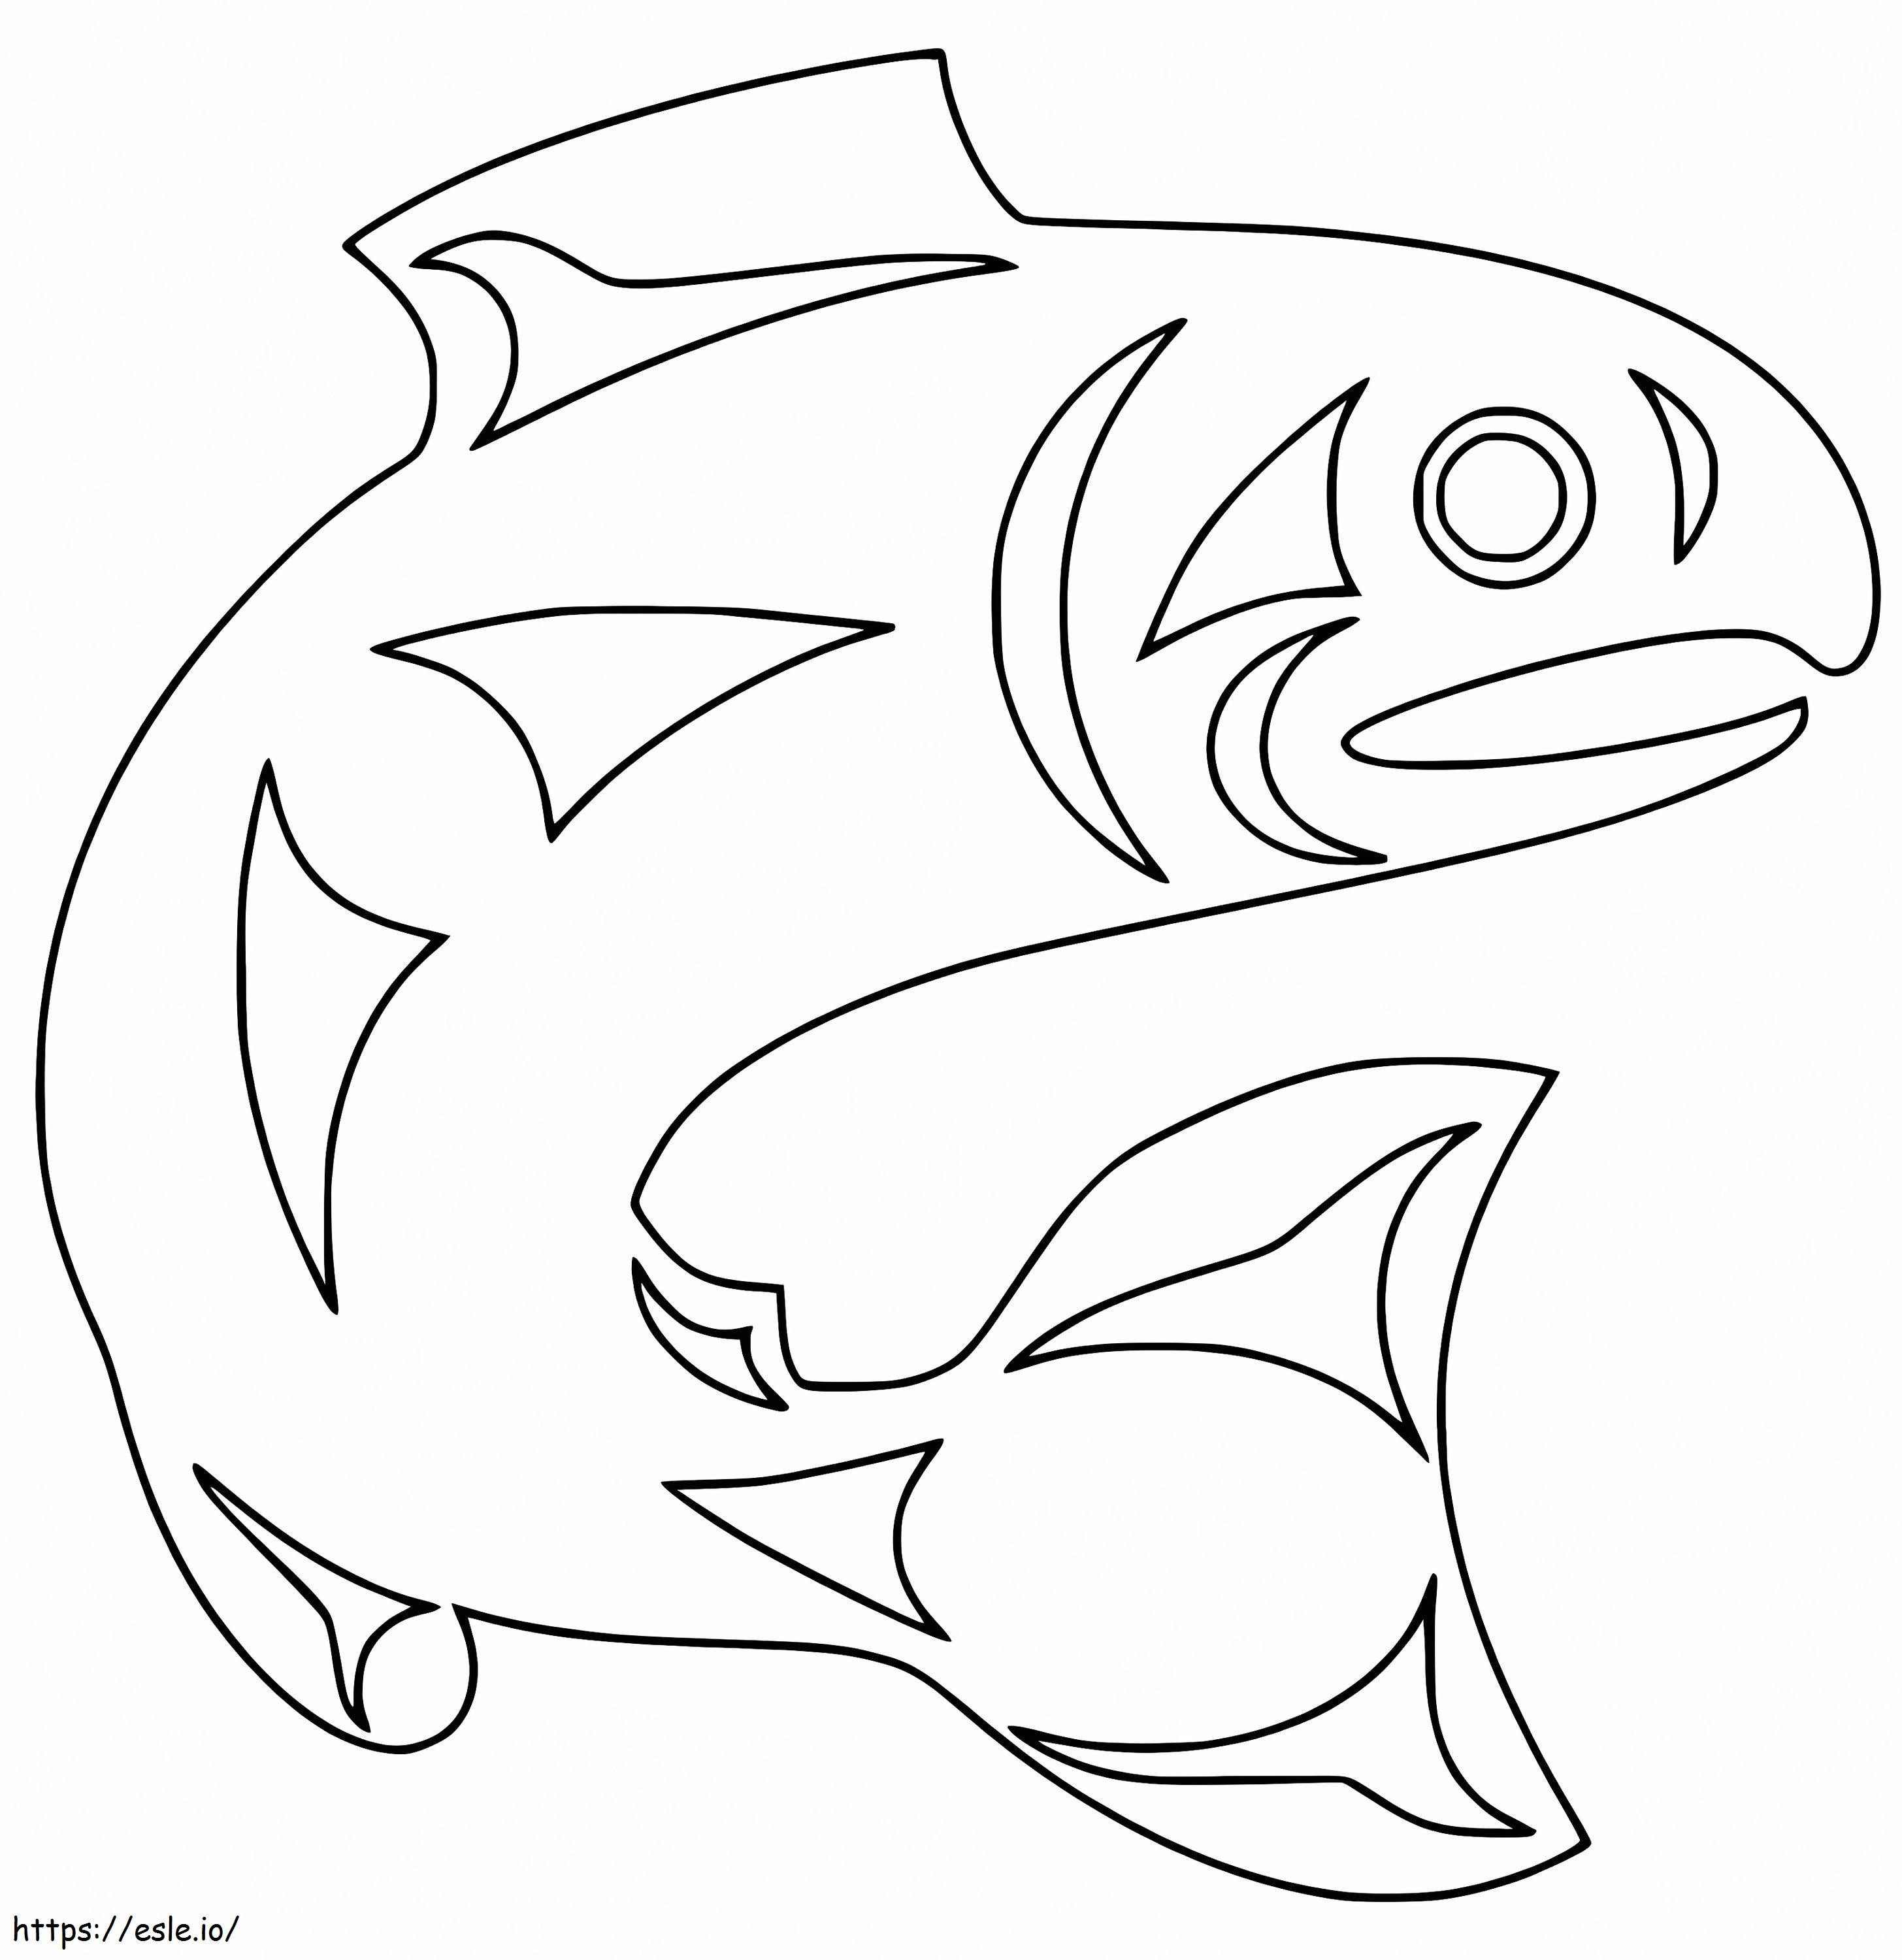 Abstract Salmon coloring page